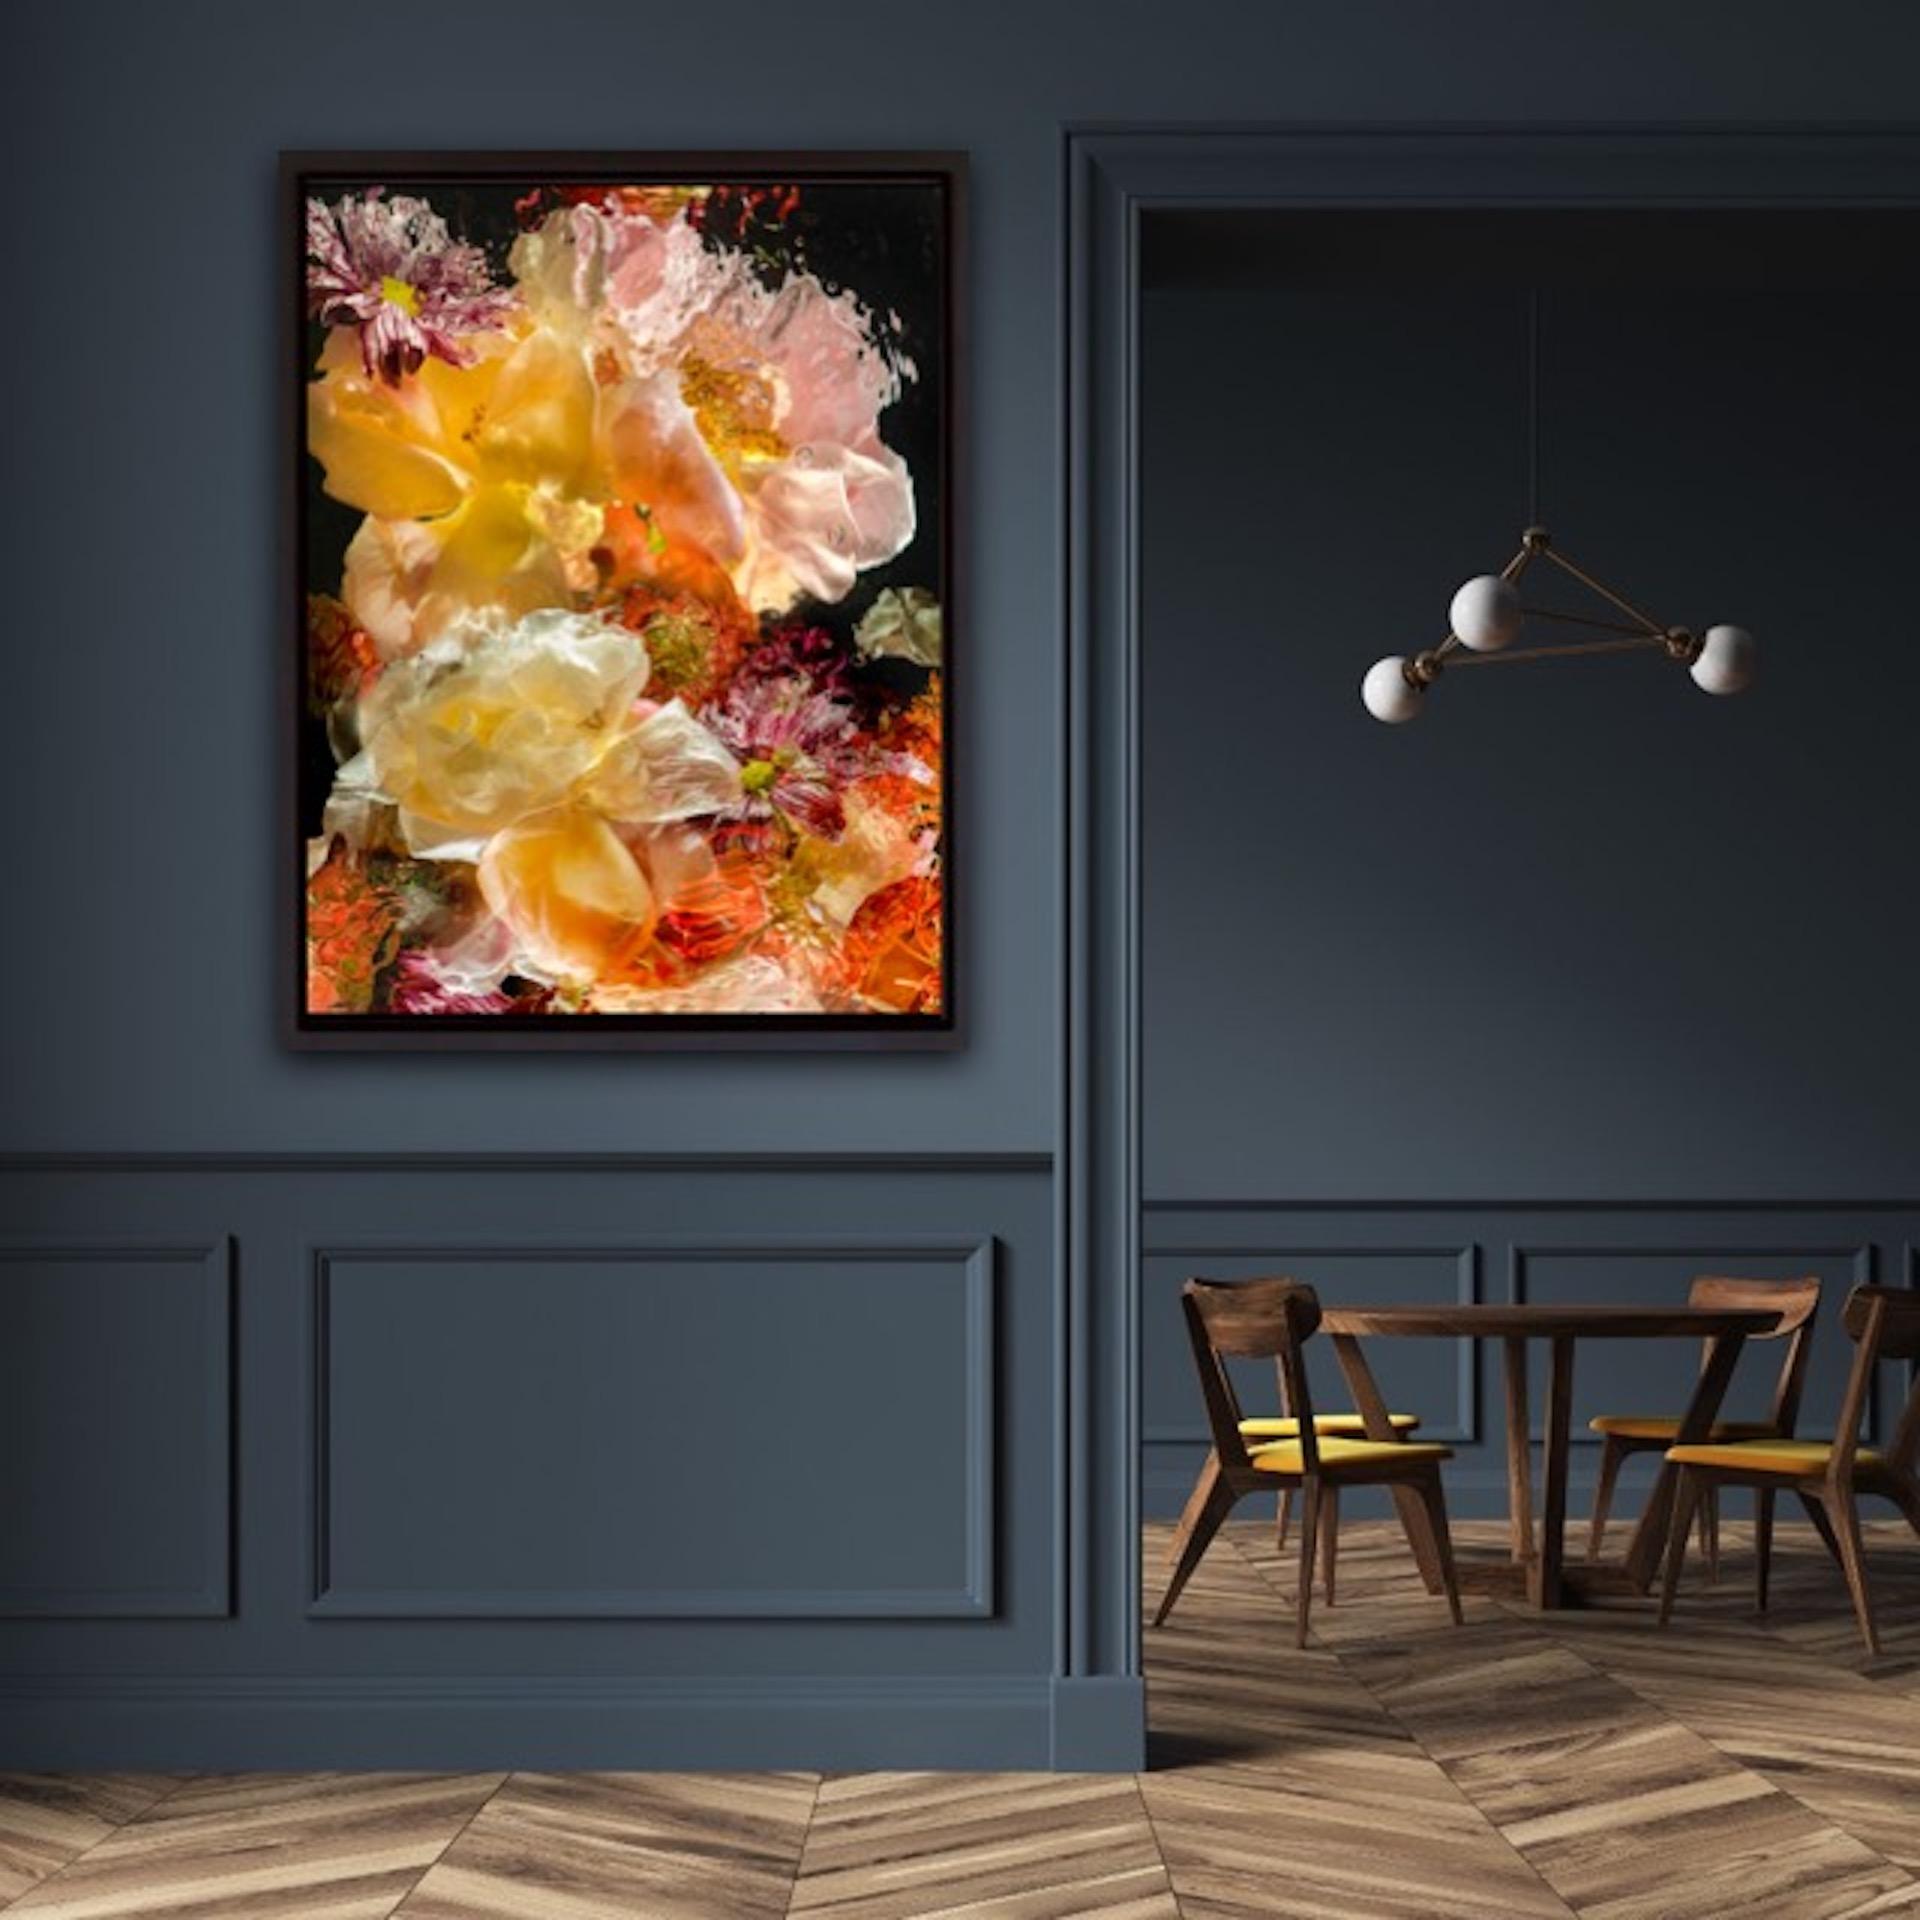 Allan Forsyth
AQUA FLORA X N°4
Limited Edition Archival Chromagenic Photographic Print
Edition of 12
Artwork Size: H 112cm x W 86cm x D 1cm
Diasec Framed
Please note that insitu images are purely an indication of how a piece may look.

Aqua Flora X